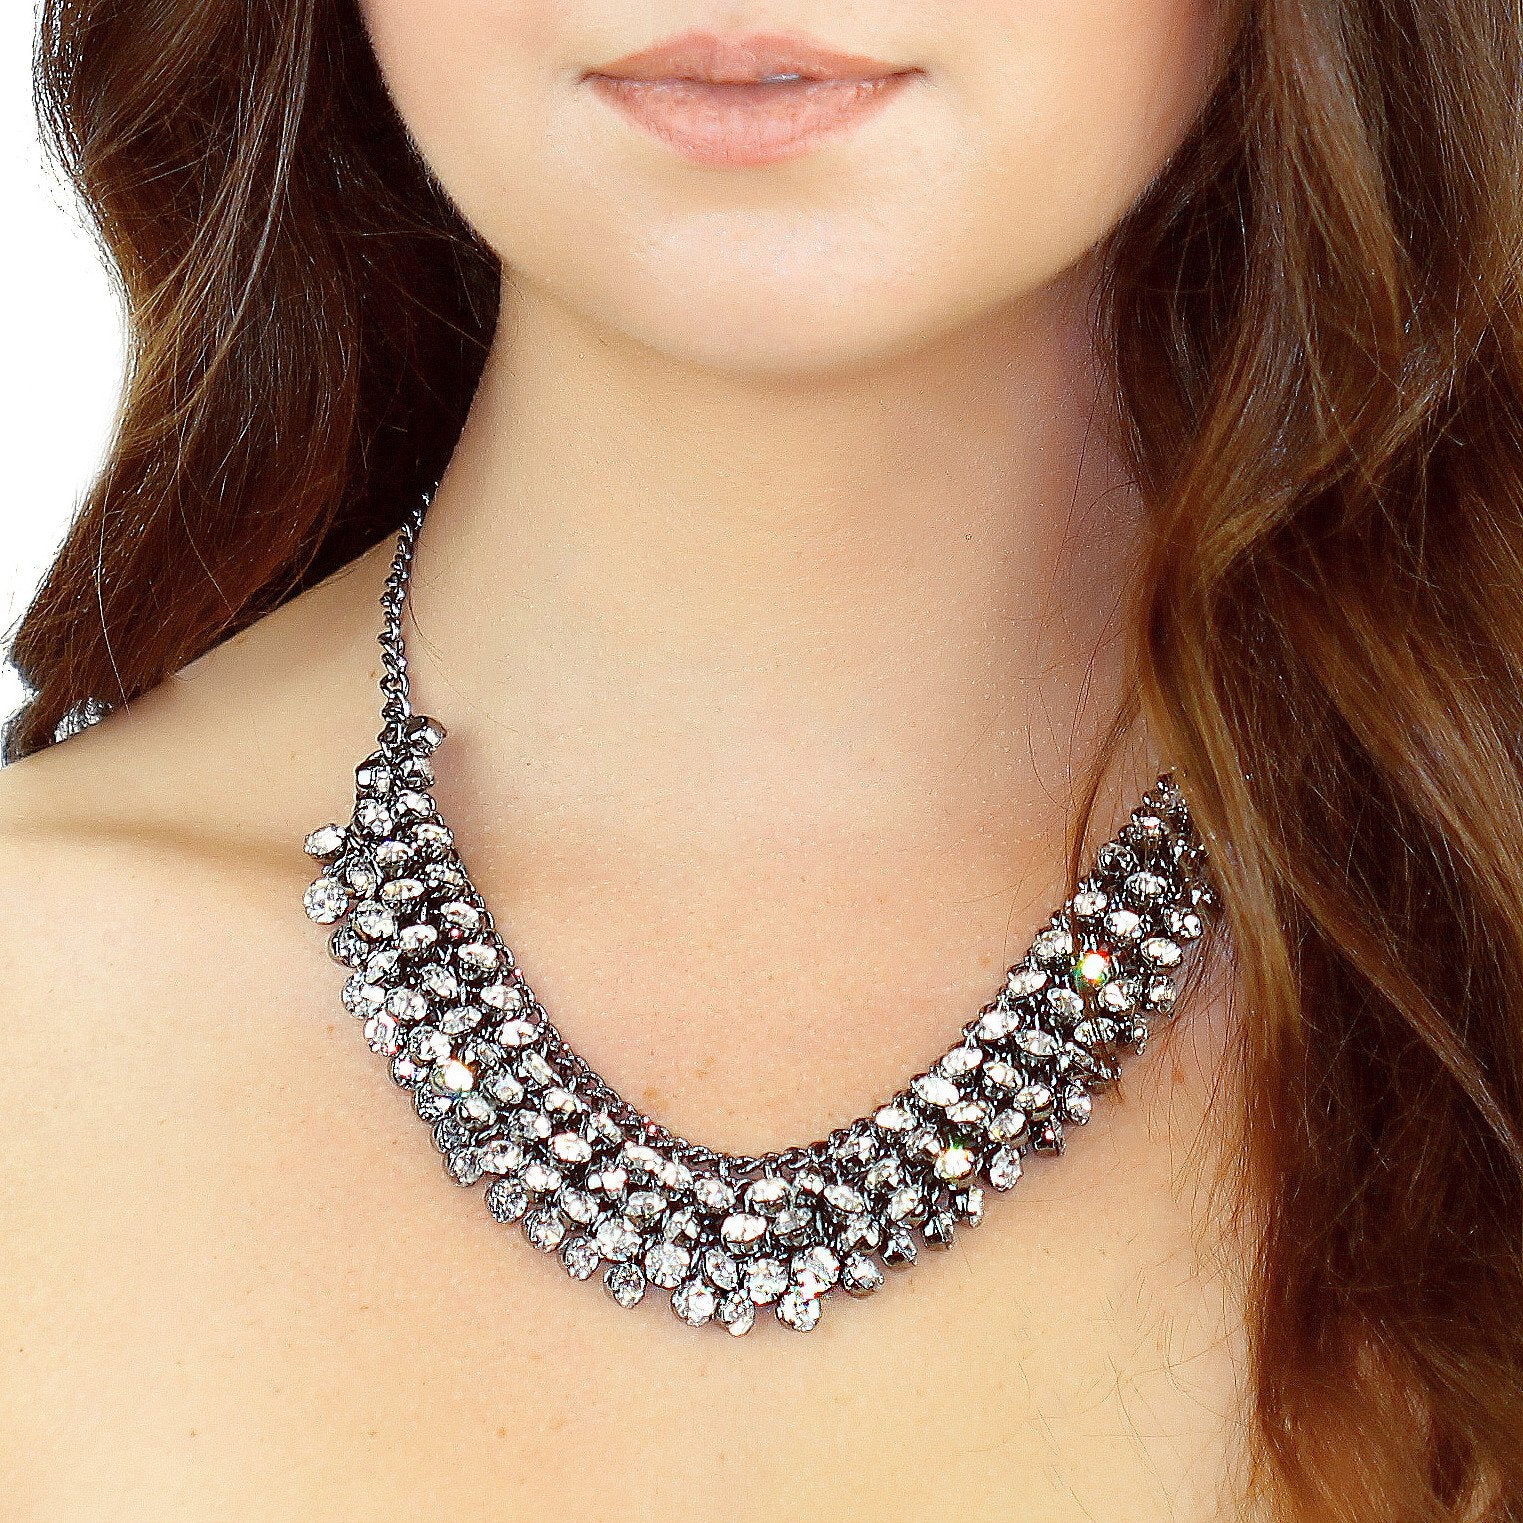 Hypoallergenic Crystal Collar Necklace with 140+ Glass Crystals - Dark Silver Graphite Tone Chain
Looking for a stunning hypoallergenic crystal collar necklace? Our necklace features over 140+ glass crystals for just the right amount of sparkle. - Necklaces - Bijou Her -  -  - 